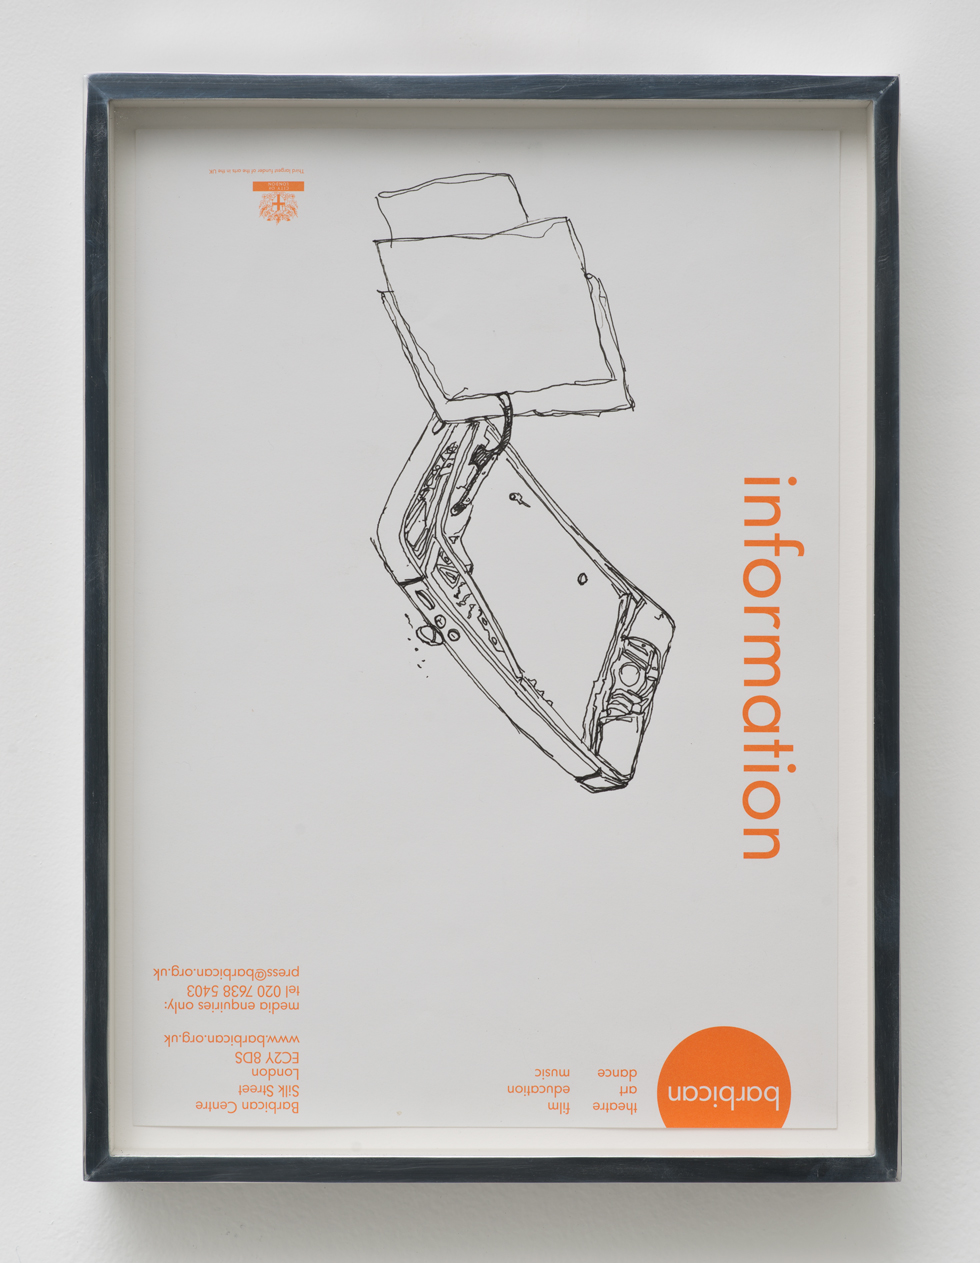   iPhone 5 A1429: Barbican Centre, London, United Kingdom, October 6, 2014   2015  Ink on letterhead  12 7/8 x 9 1/2 inches   Drawings, 2014–    Walid AlBeshti, 2015    Atopolis, 2015     